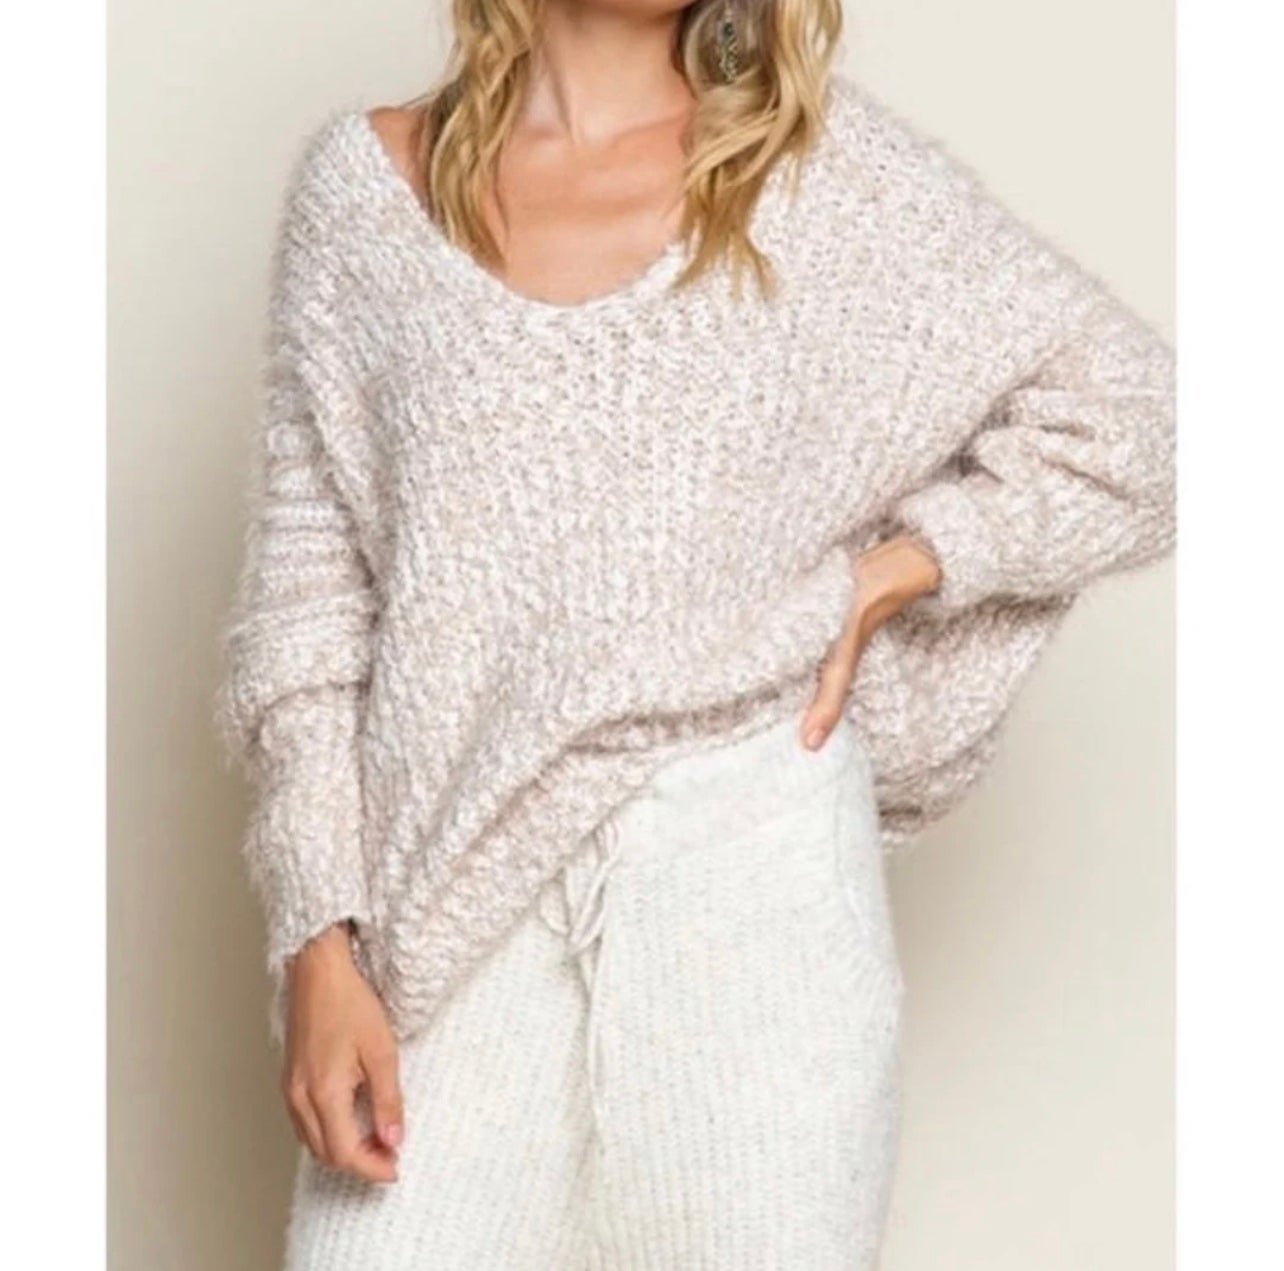 large discount WE THE FREE PEOPLE OVERSIZED PULLOVER SWEATER M/L J3Q8ijl6z Zero Profit 